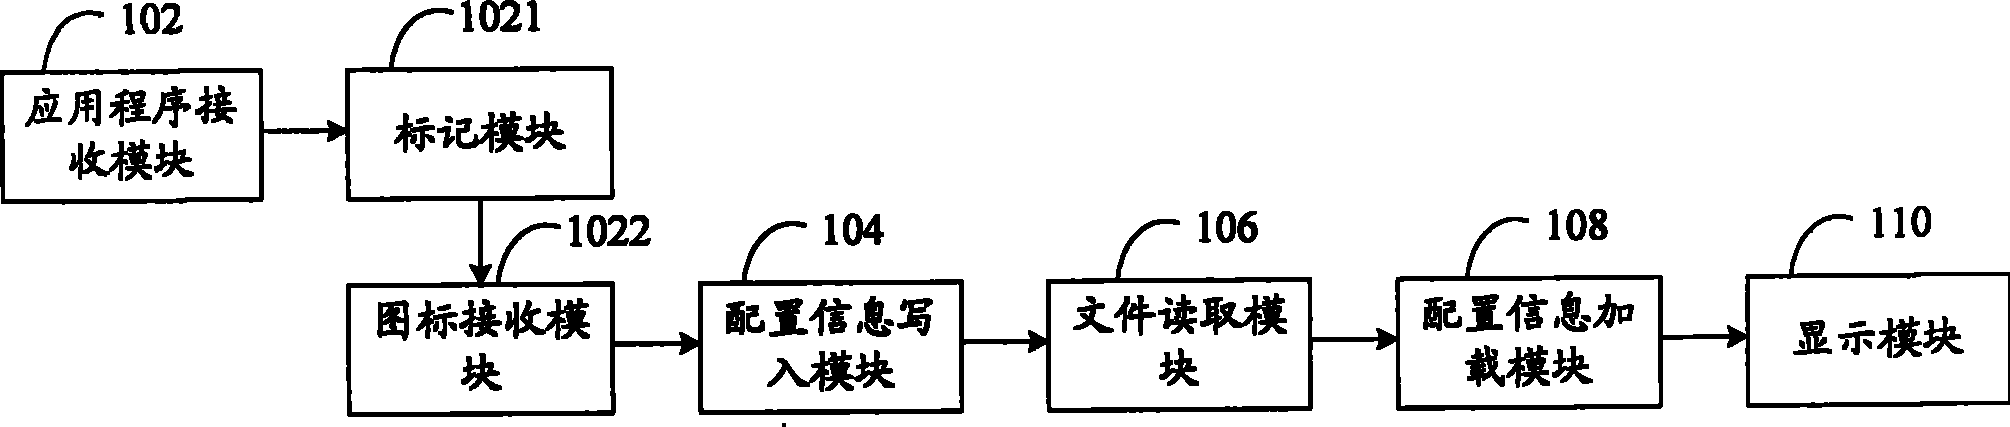 Method and system for customizing applications and displaying application information